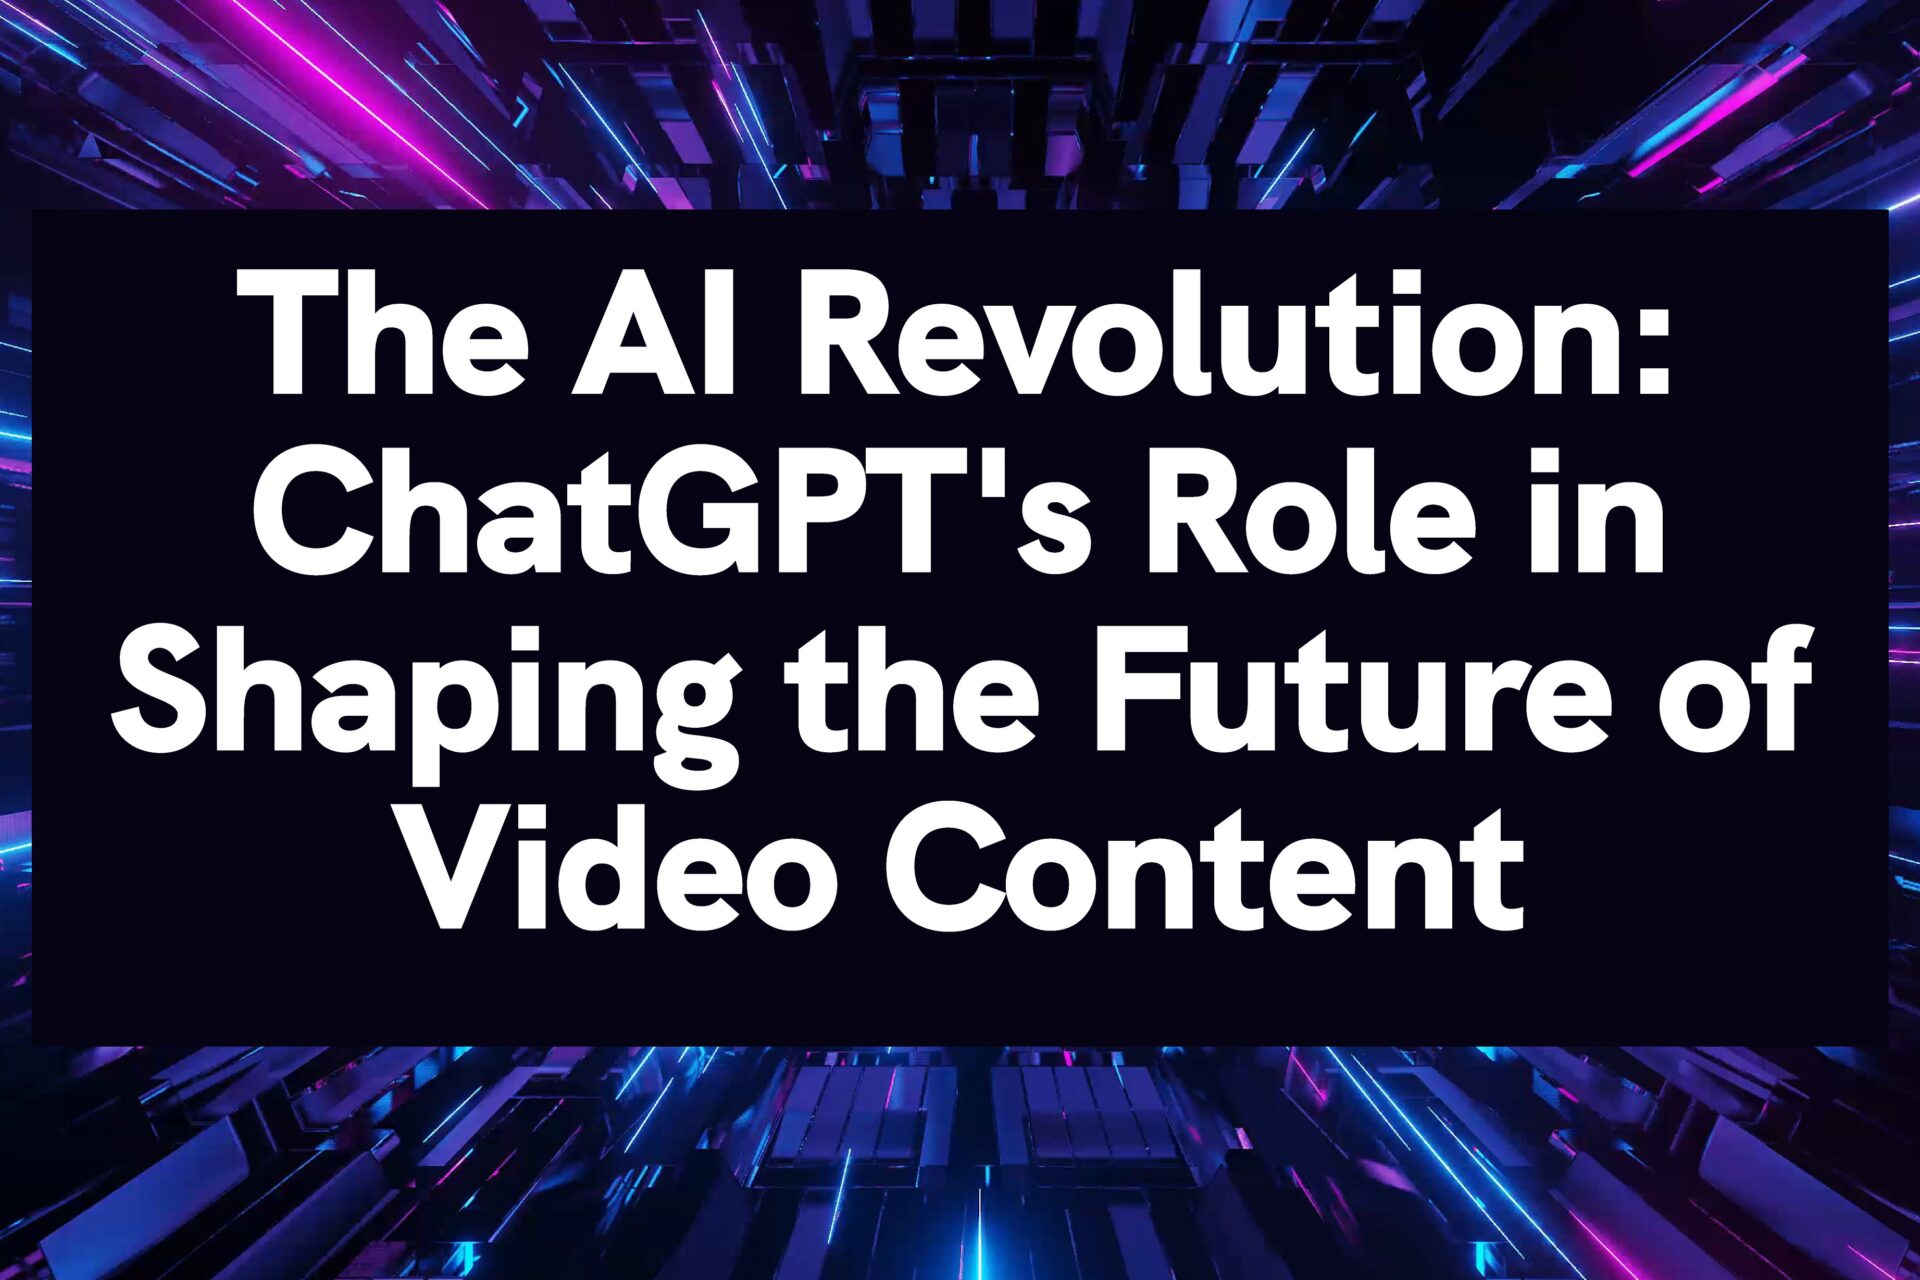 The AI Revolution: ChatGPT’s Role in Shaping the Future of Video Content